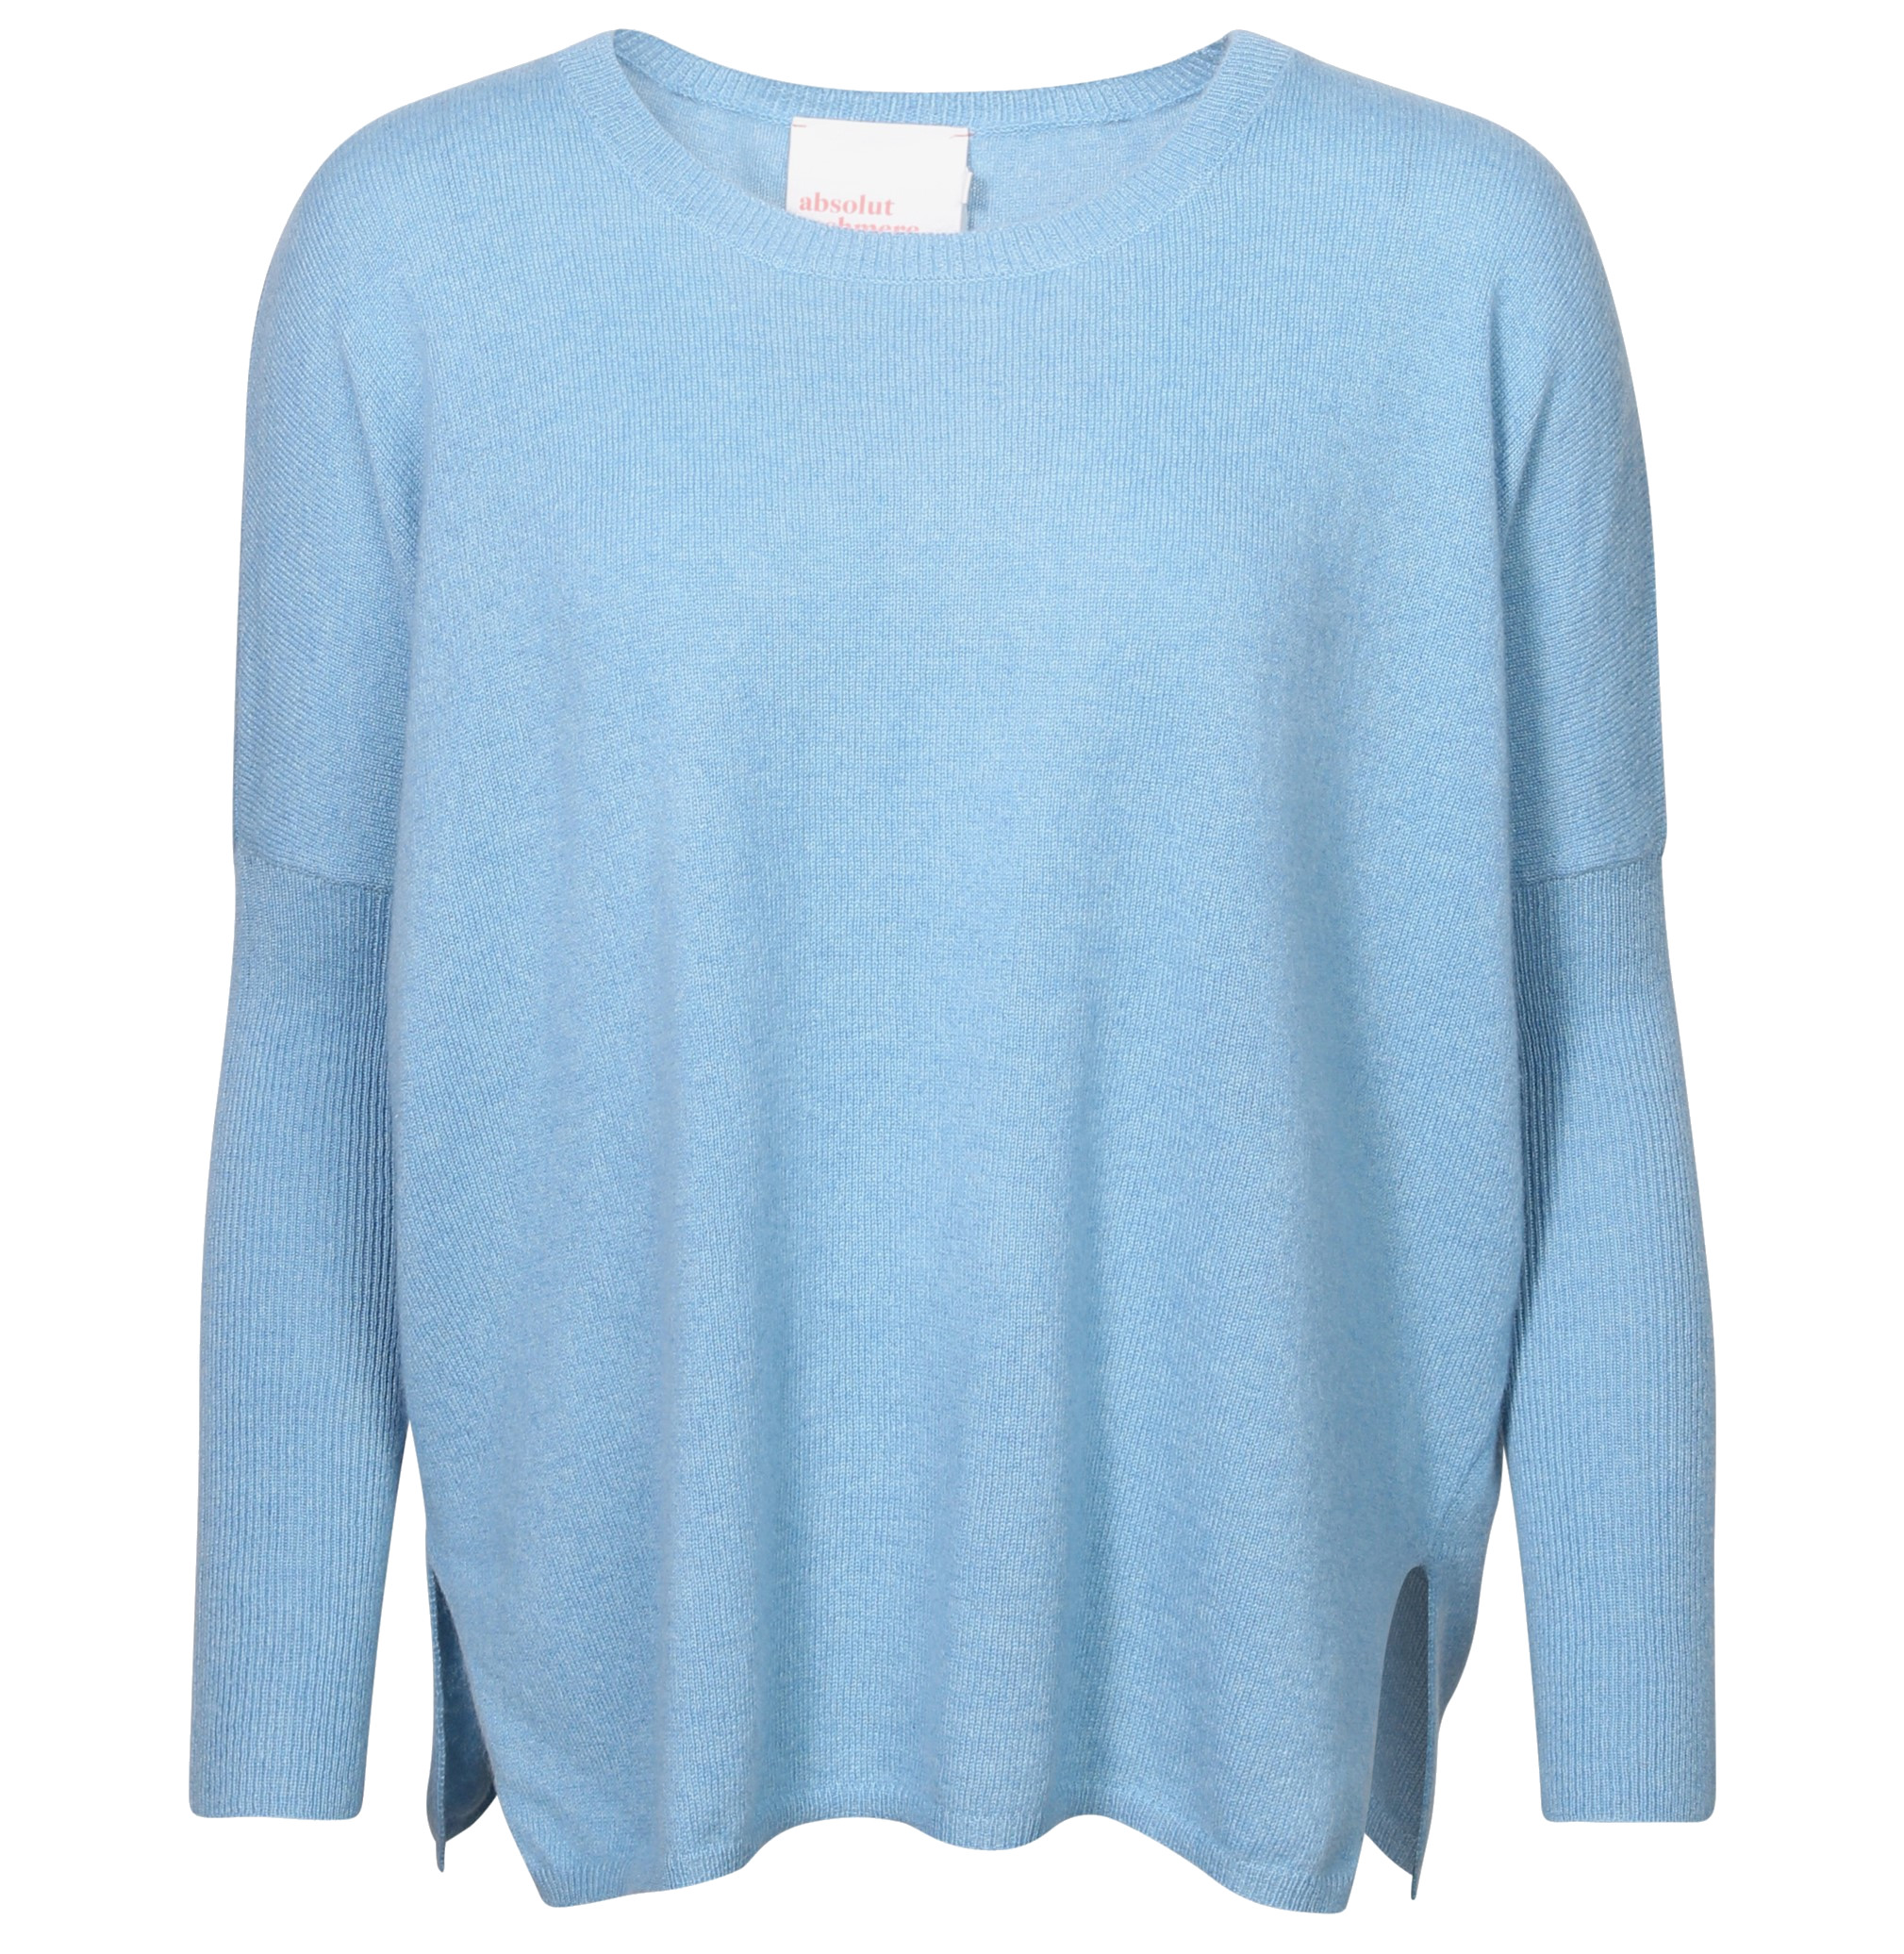 ABSOLUT CASHMERE Poncho Sweater Astrid in Blue S